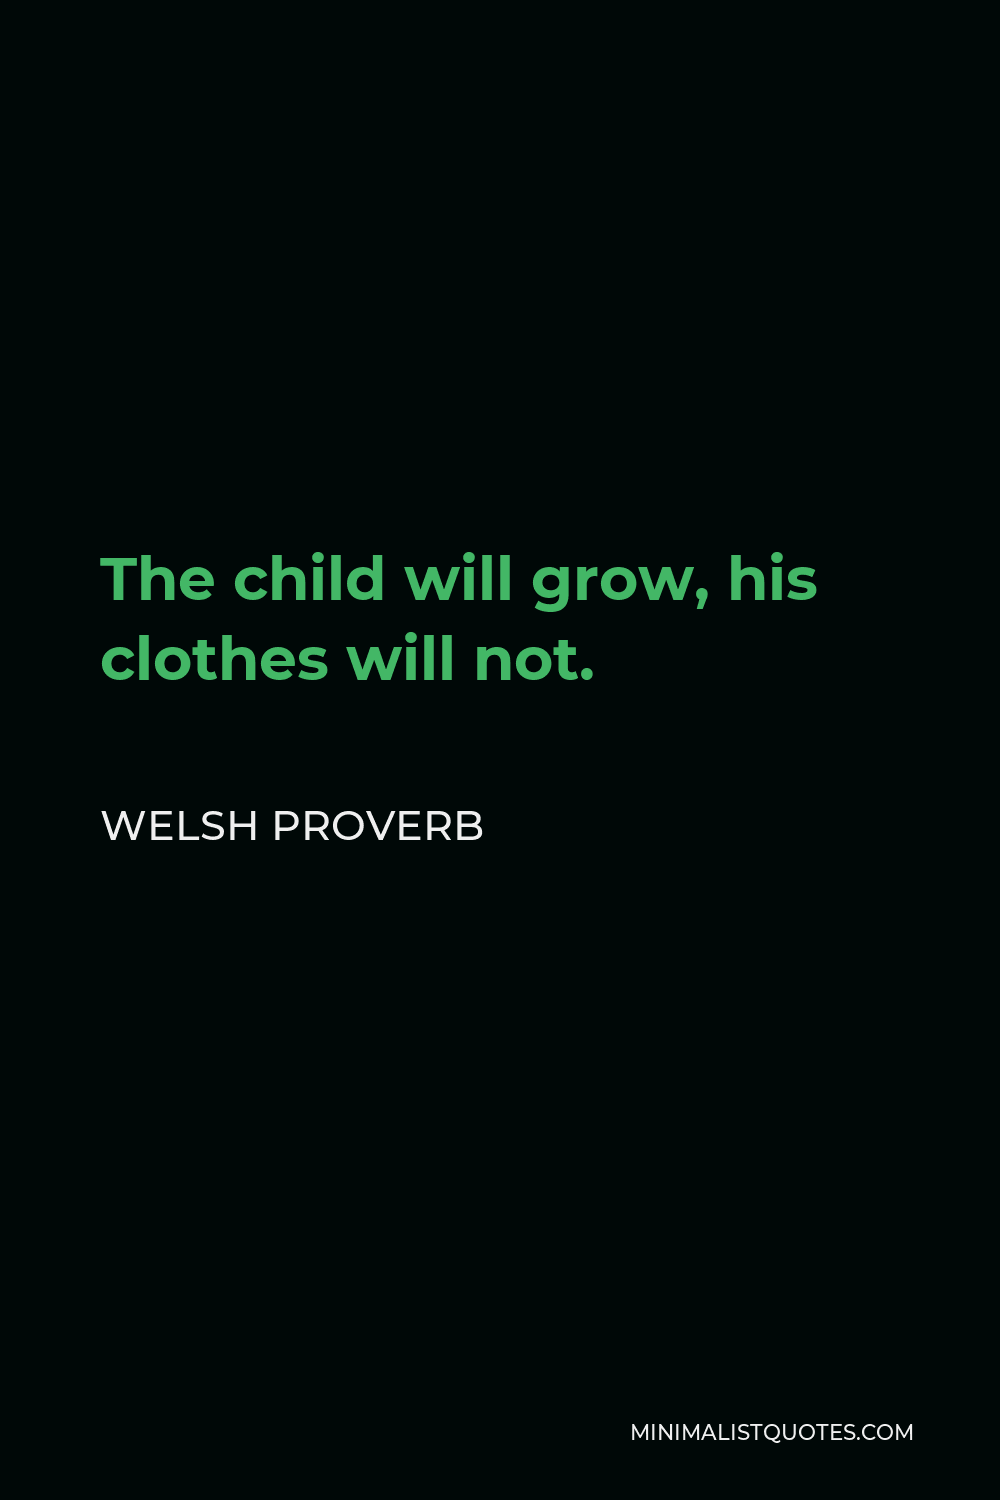 Welsh Proverb Quote - The child will grow, his clothes will not.